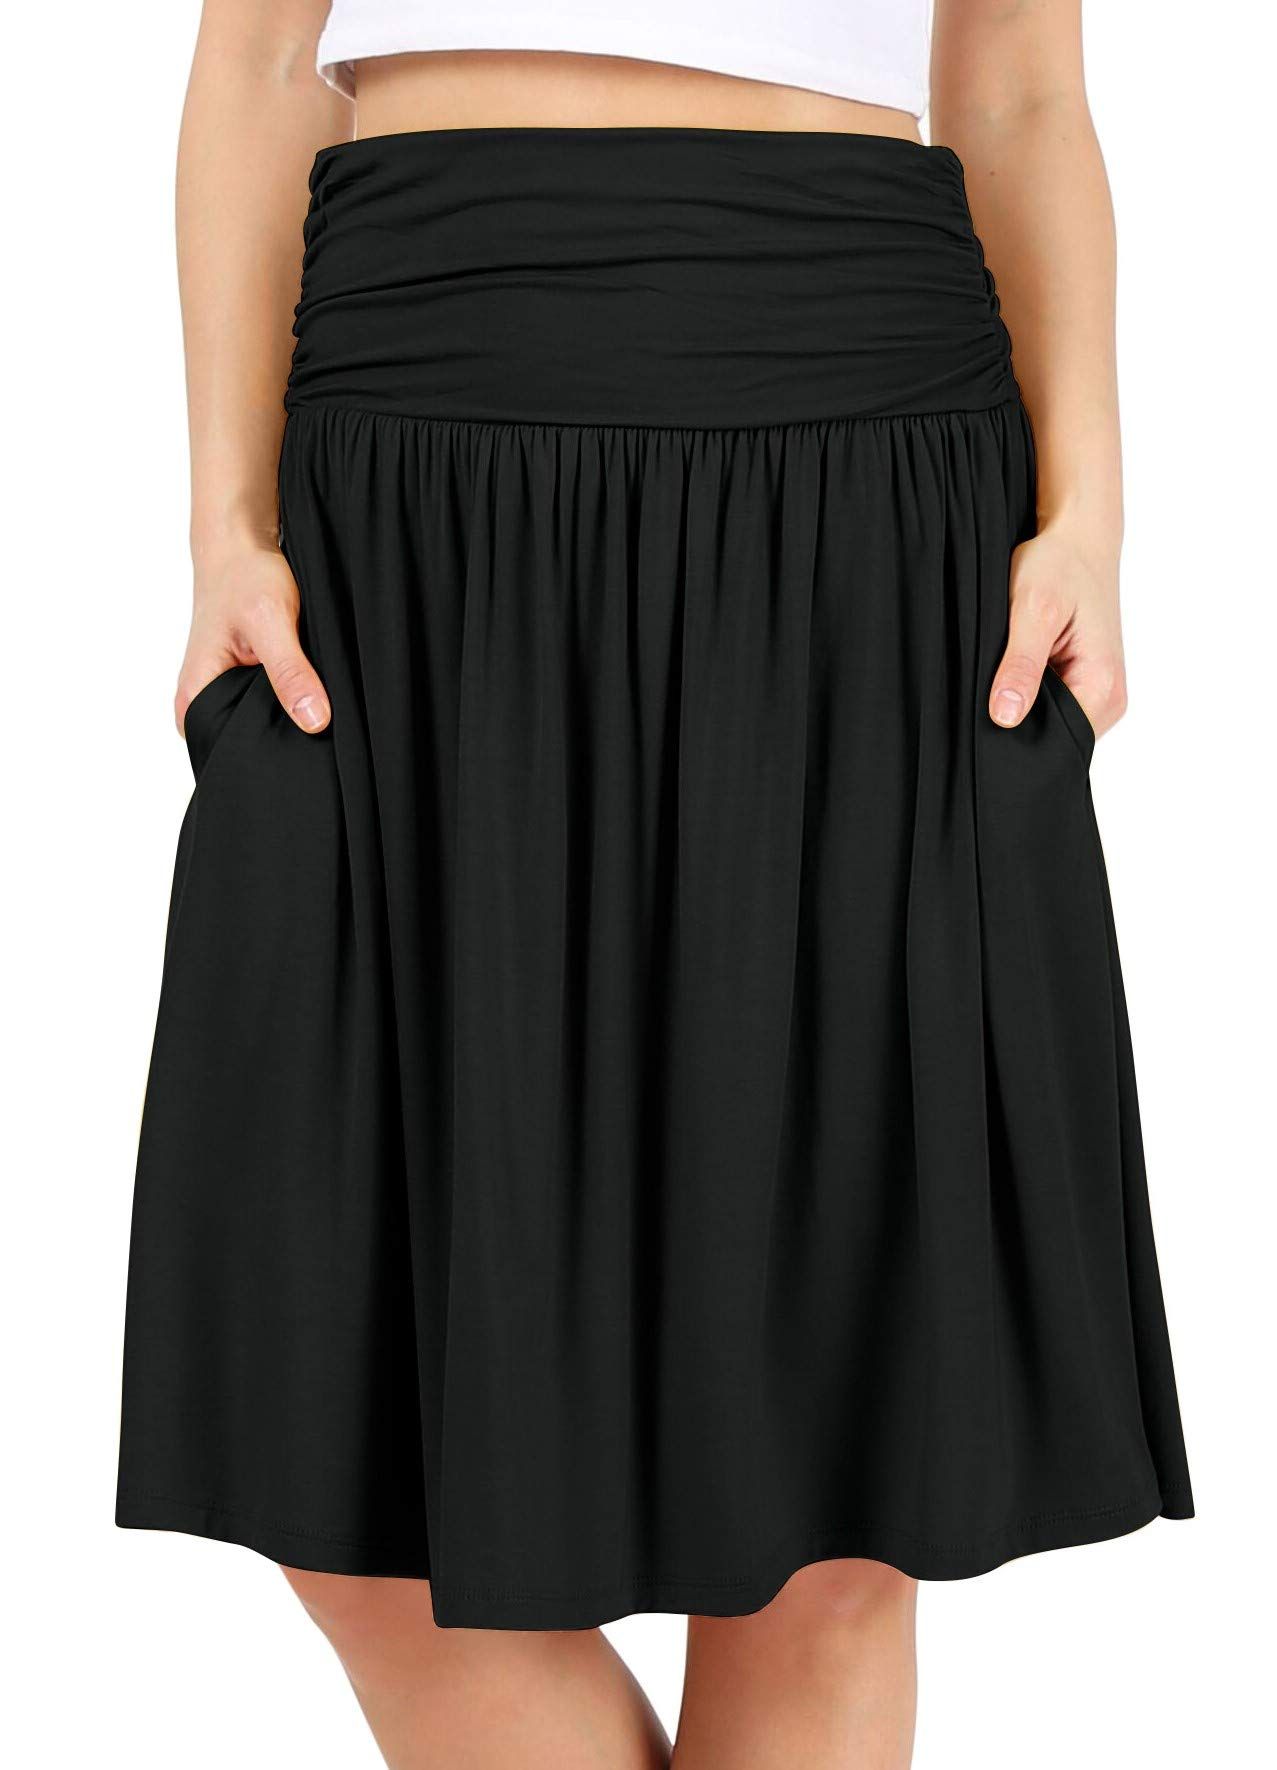 Skirts - Shop Skirts For Casual & Classy Look